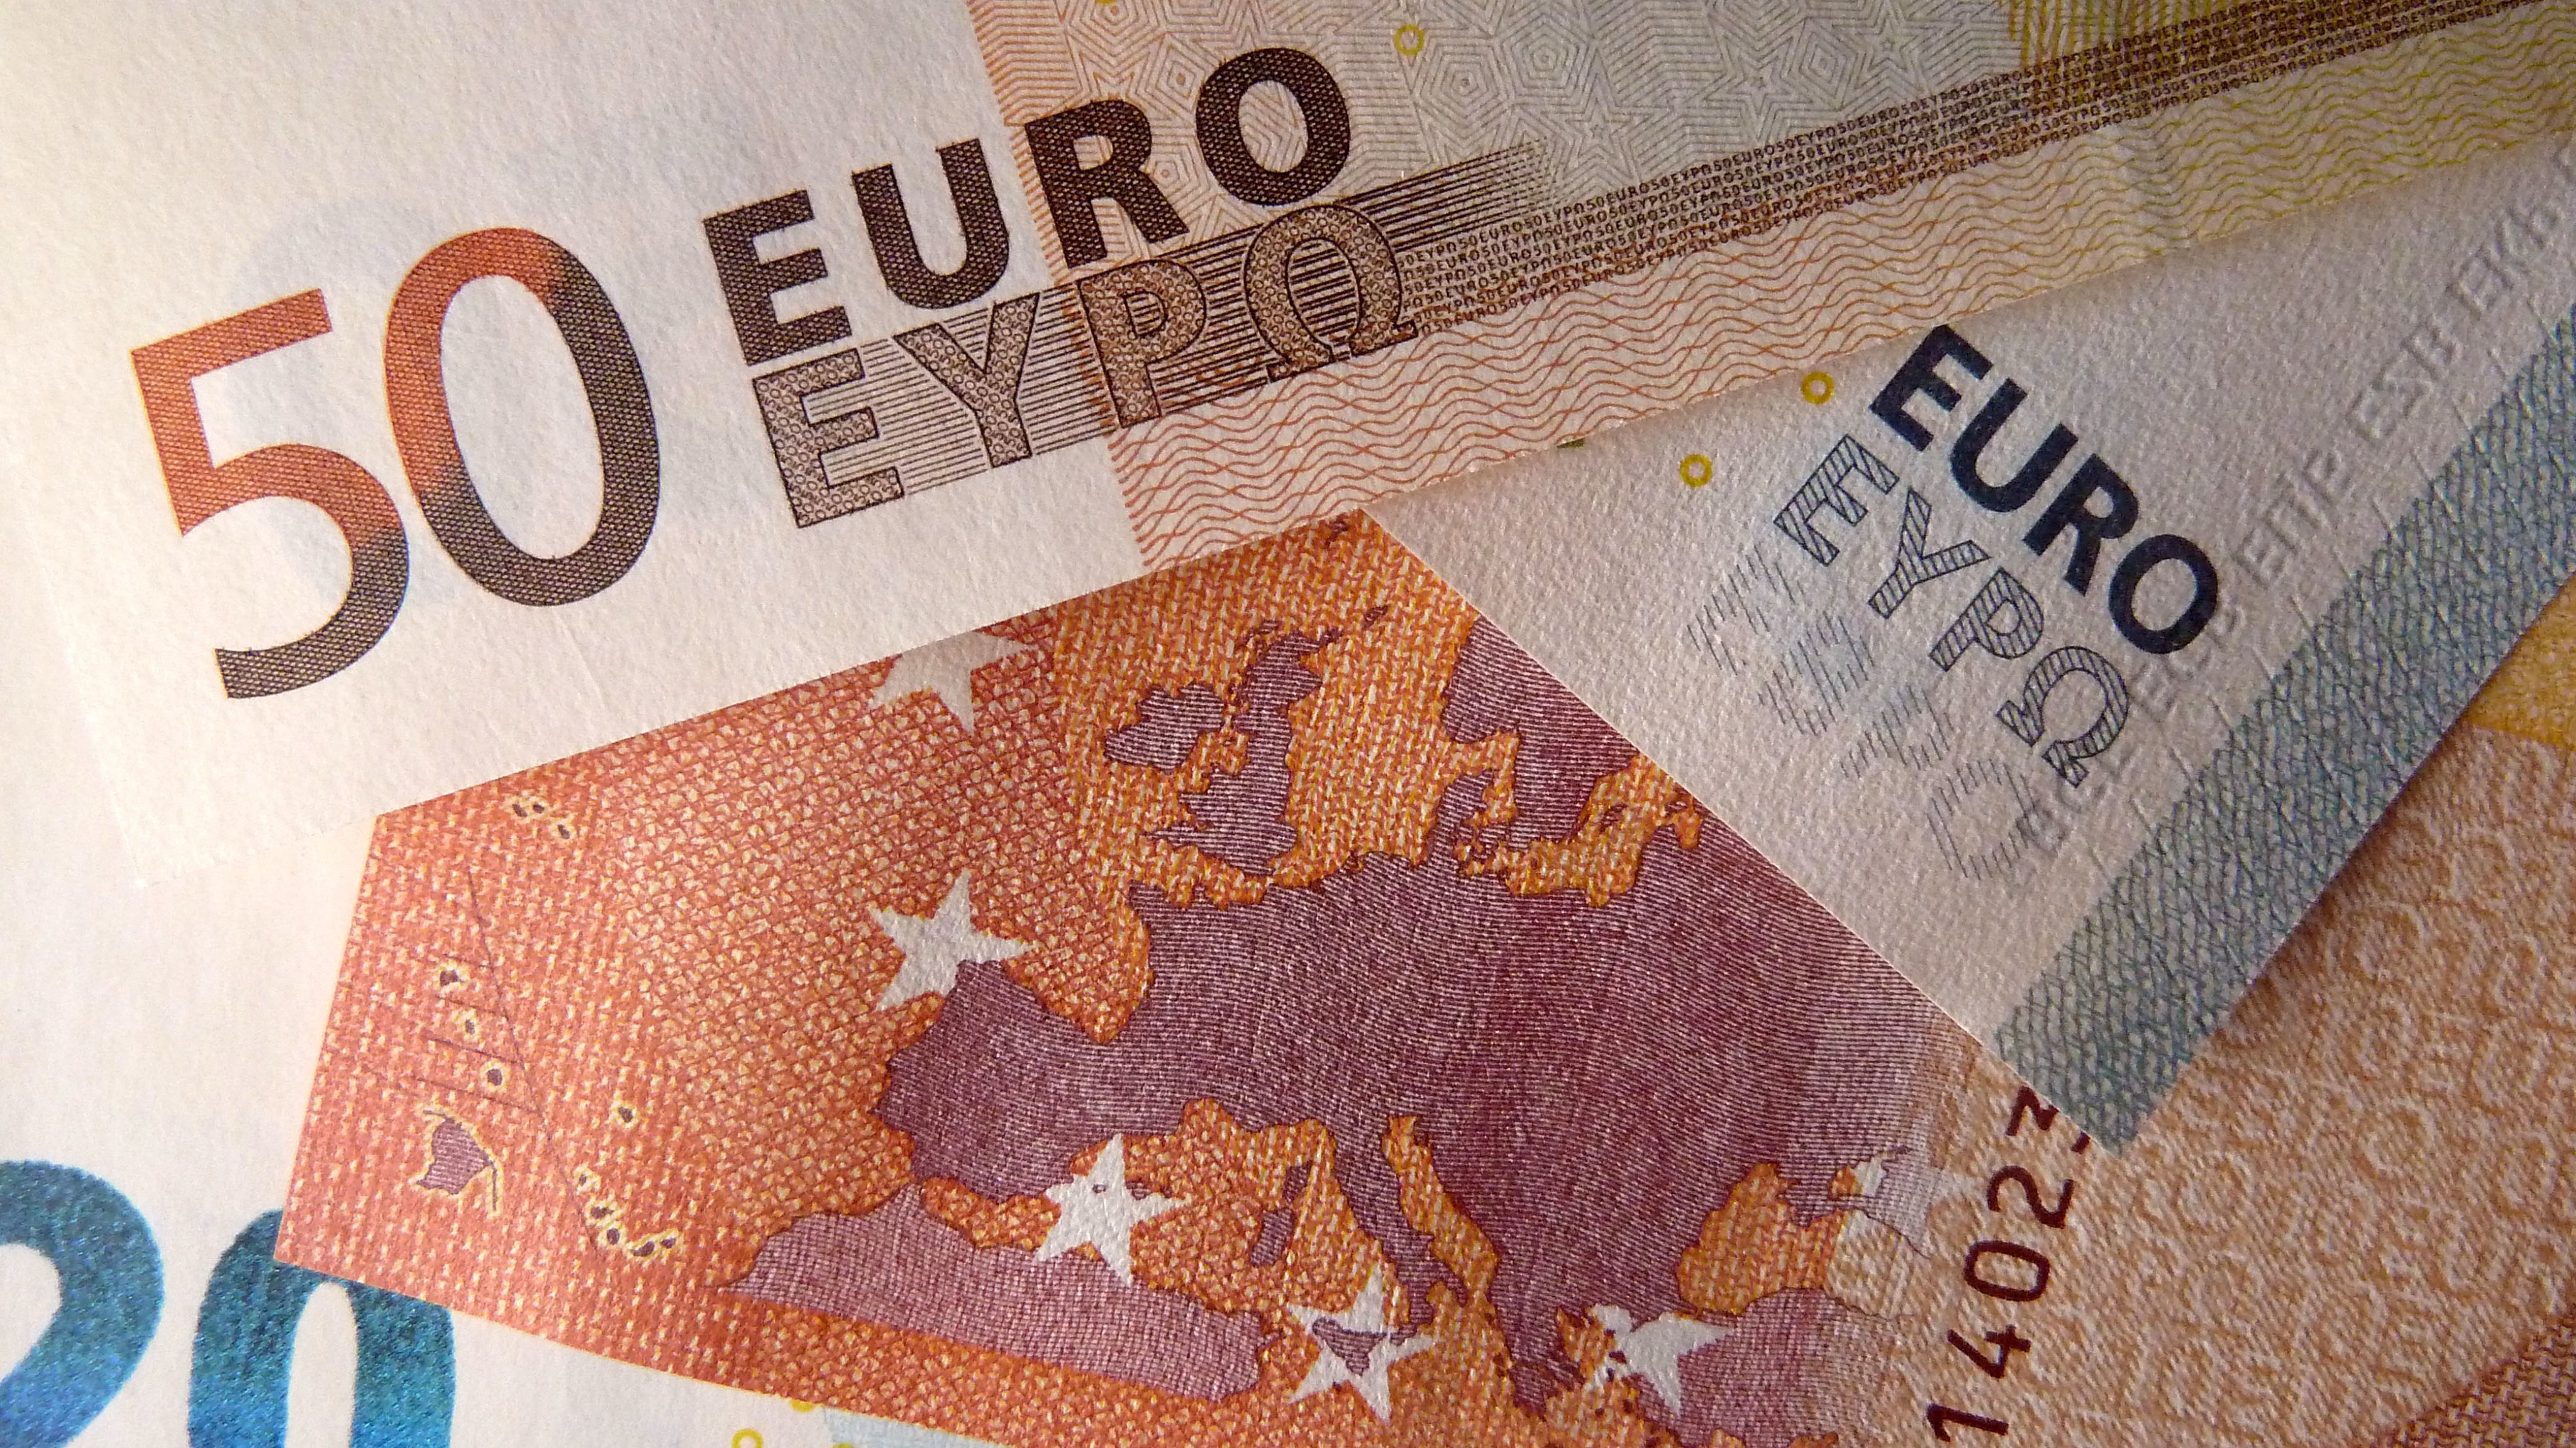 Details Of EURO Banknotes